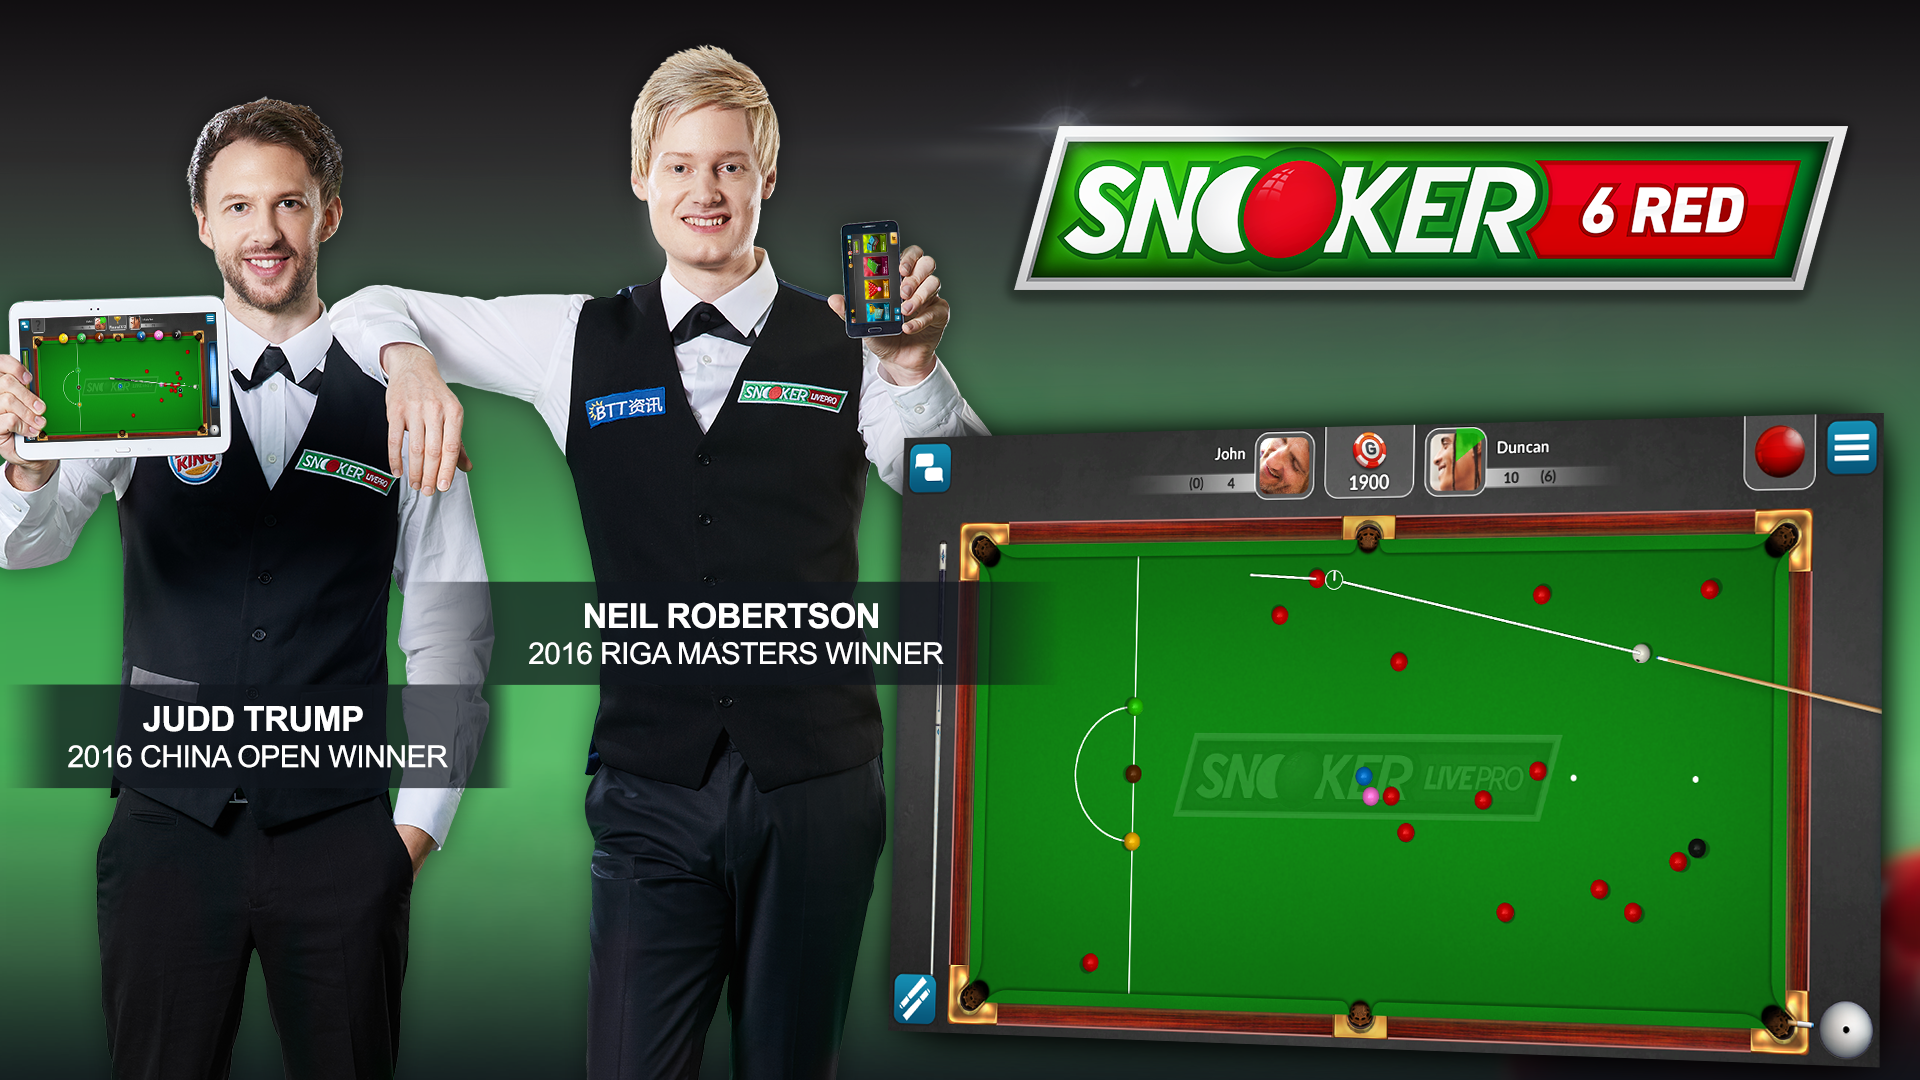 Snooker Live Pro screenshots, images and pictures